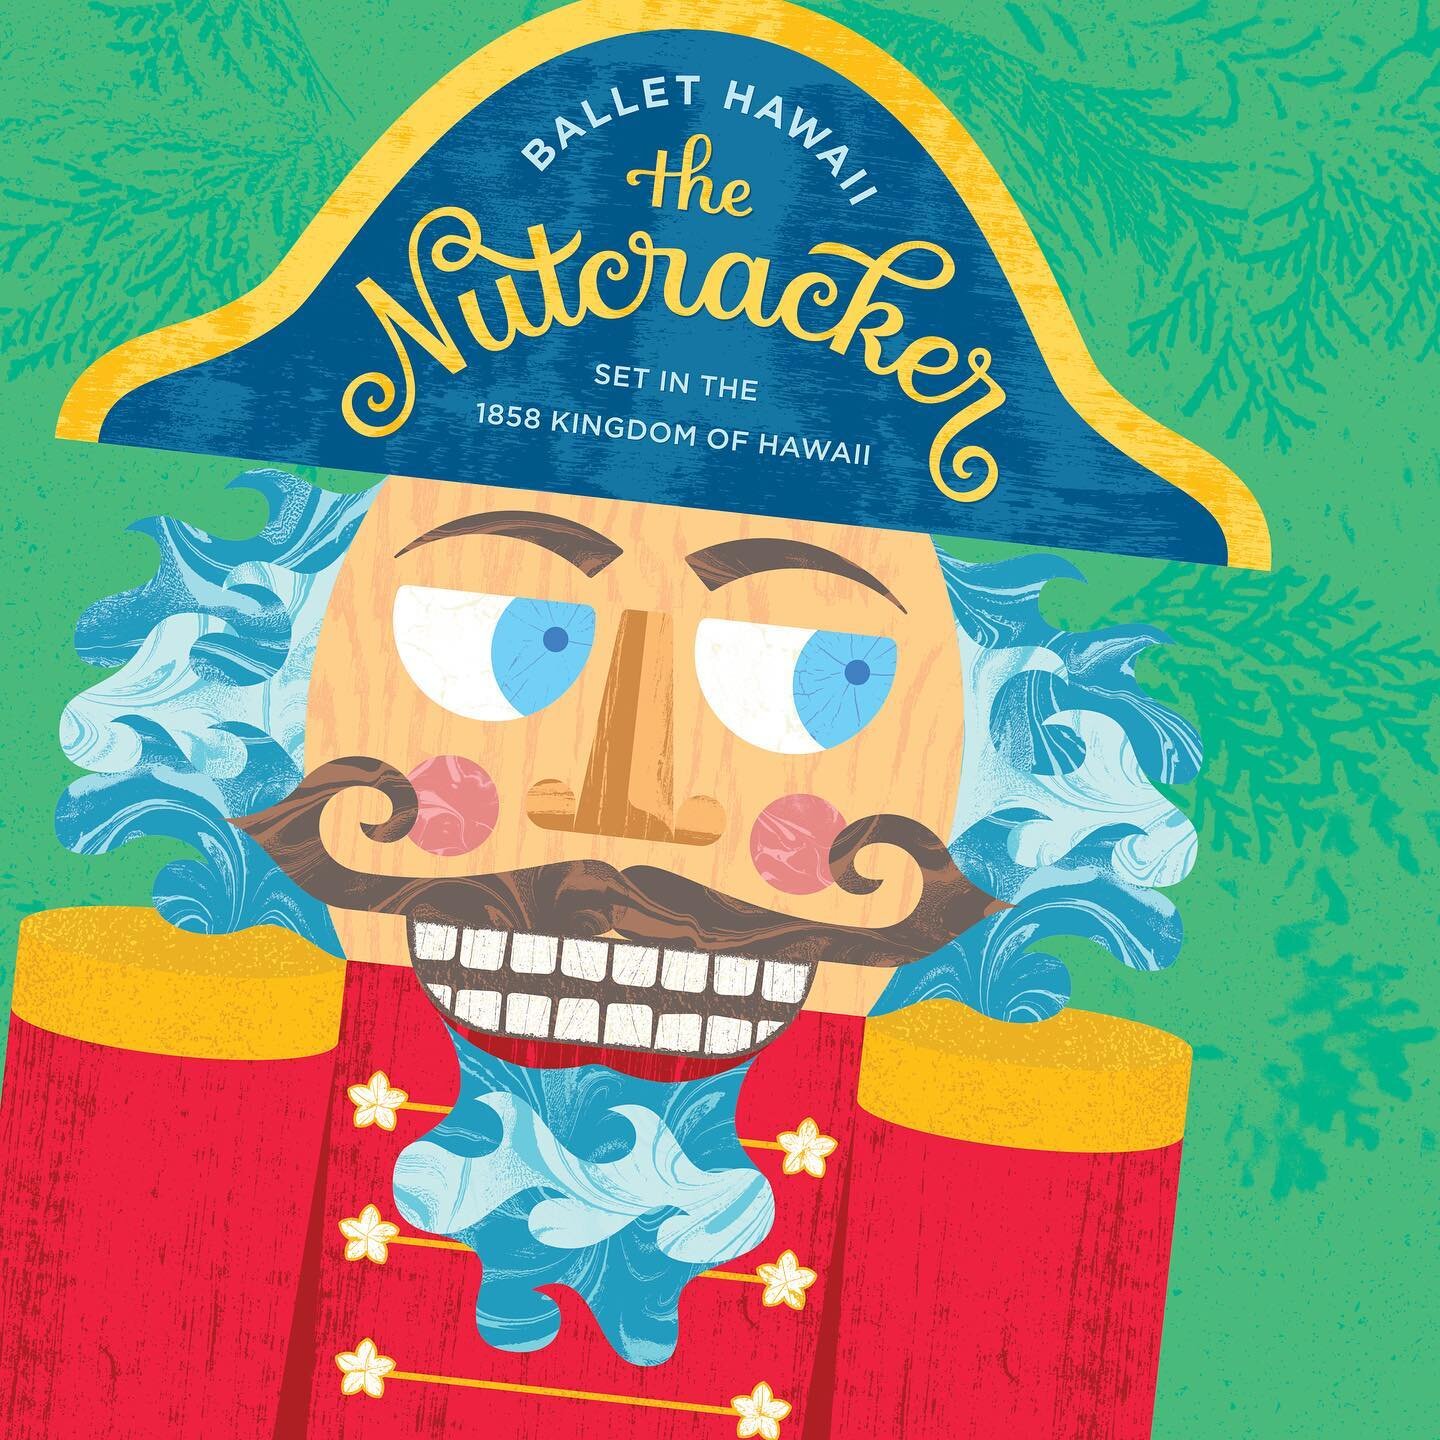 I'm cracking with excitement to share the new logo and illustration for Ballet Hawaii's Nutcracker! It was a delight to incorporate whimsy, mischief, and some nods to Hawaii in the art. Did you notice his hair is made of waves?
&bull;
Big thanks to @